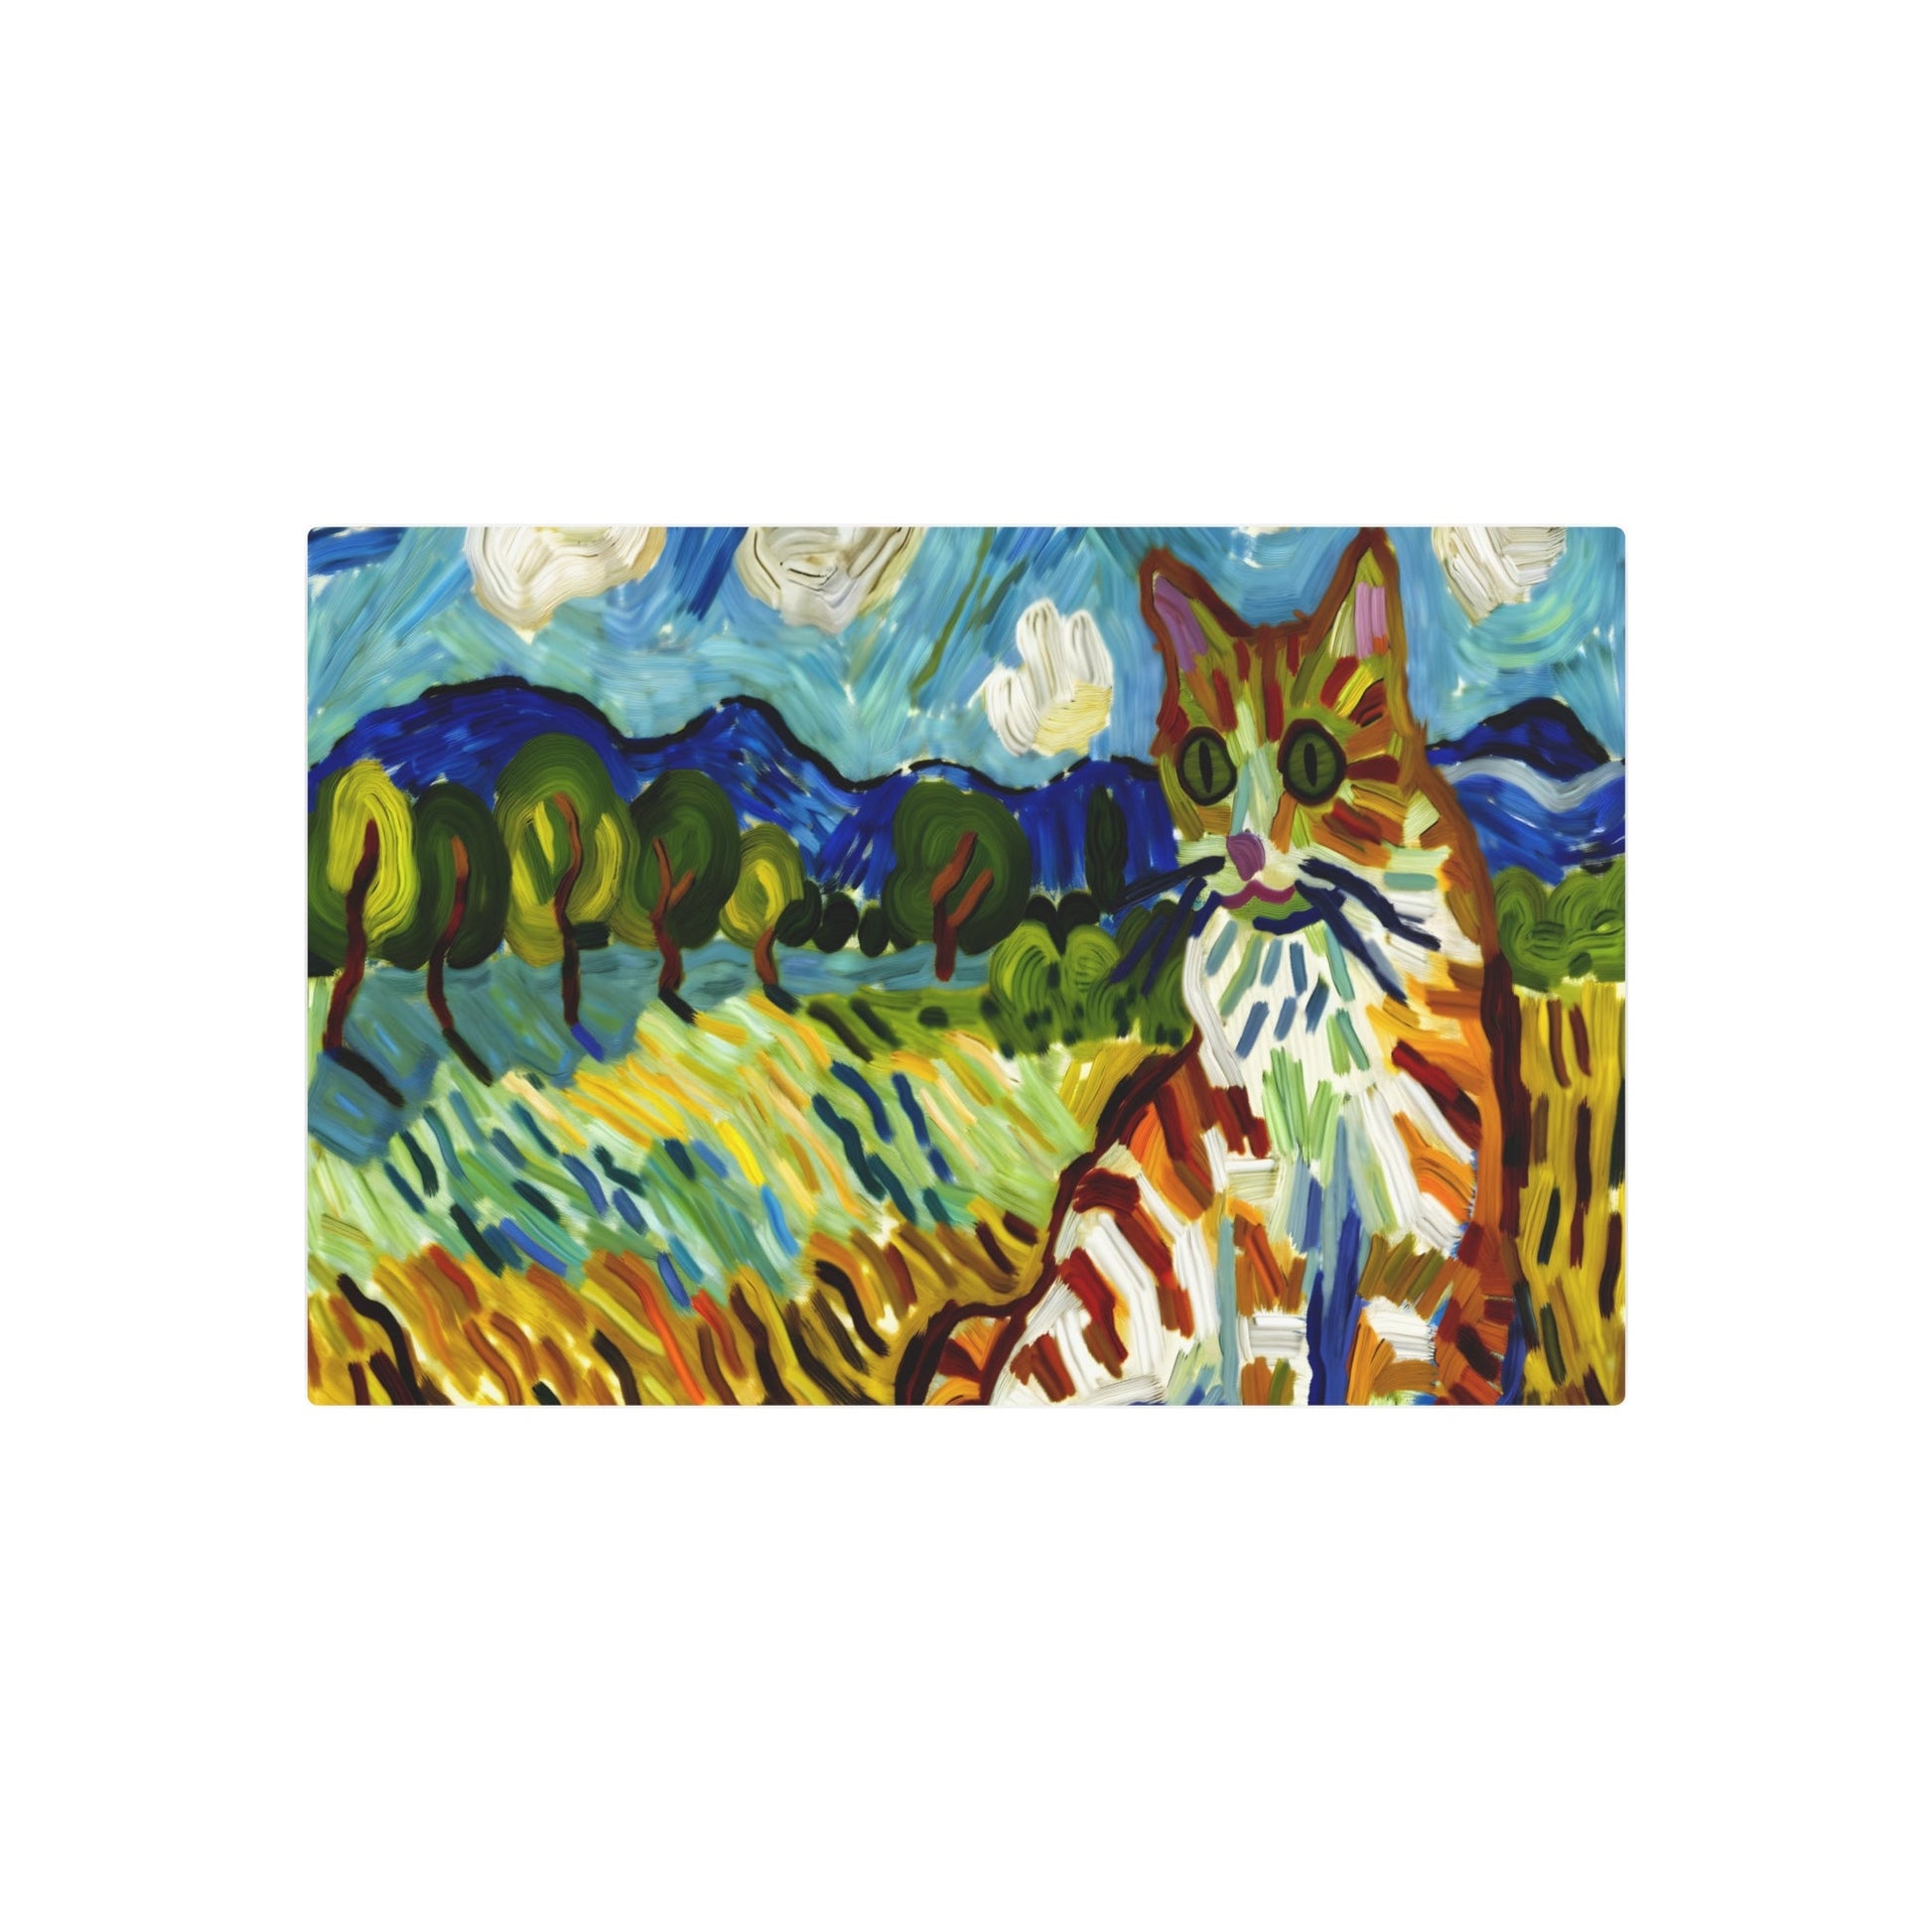 Metal Poster Art | "Post-Impressionism Inspired Colorful Cat Landscape - Western Art Styles Collection" - Metal Poster Art 30″ x 20″ (Horizontal) 0.12''